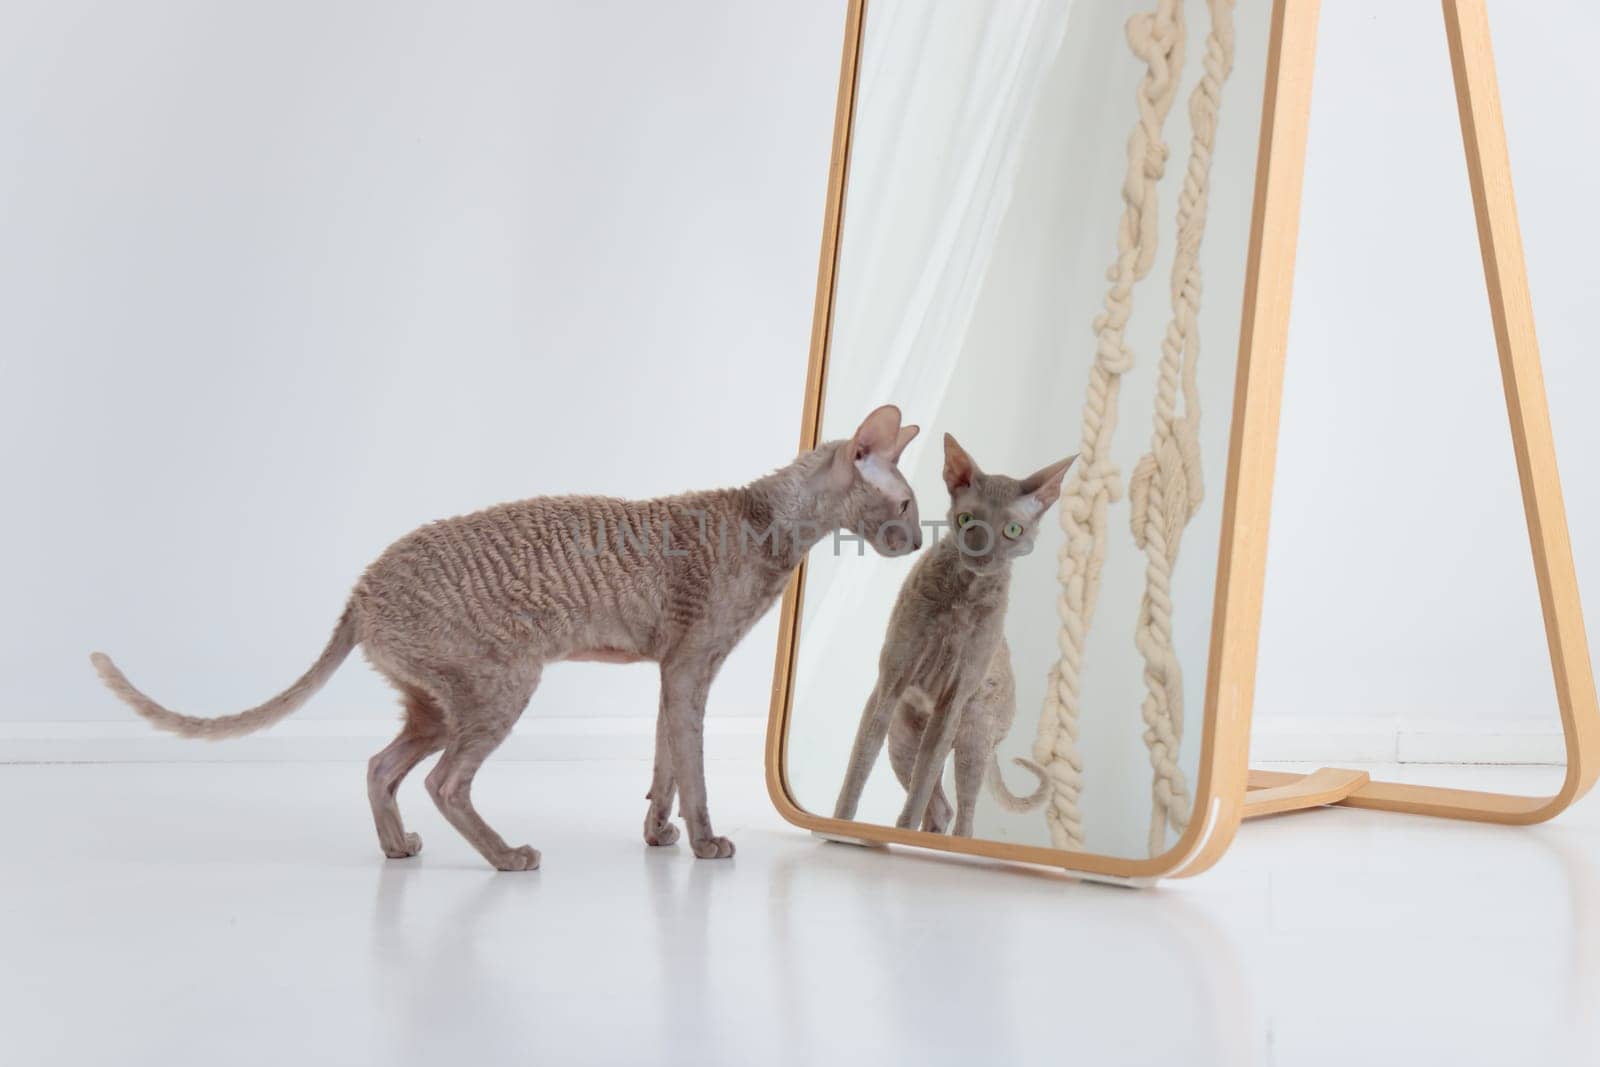 Cute cornish rex cat looking at hirself in the mirror on the white floor